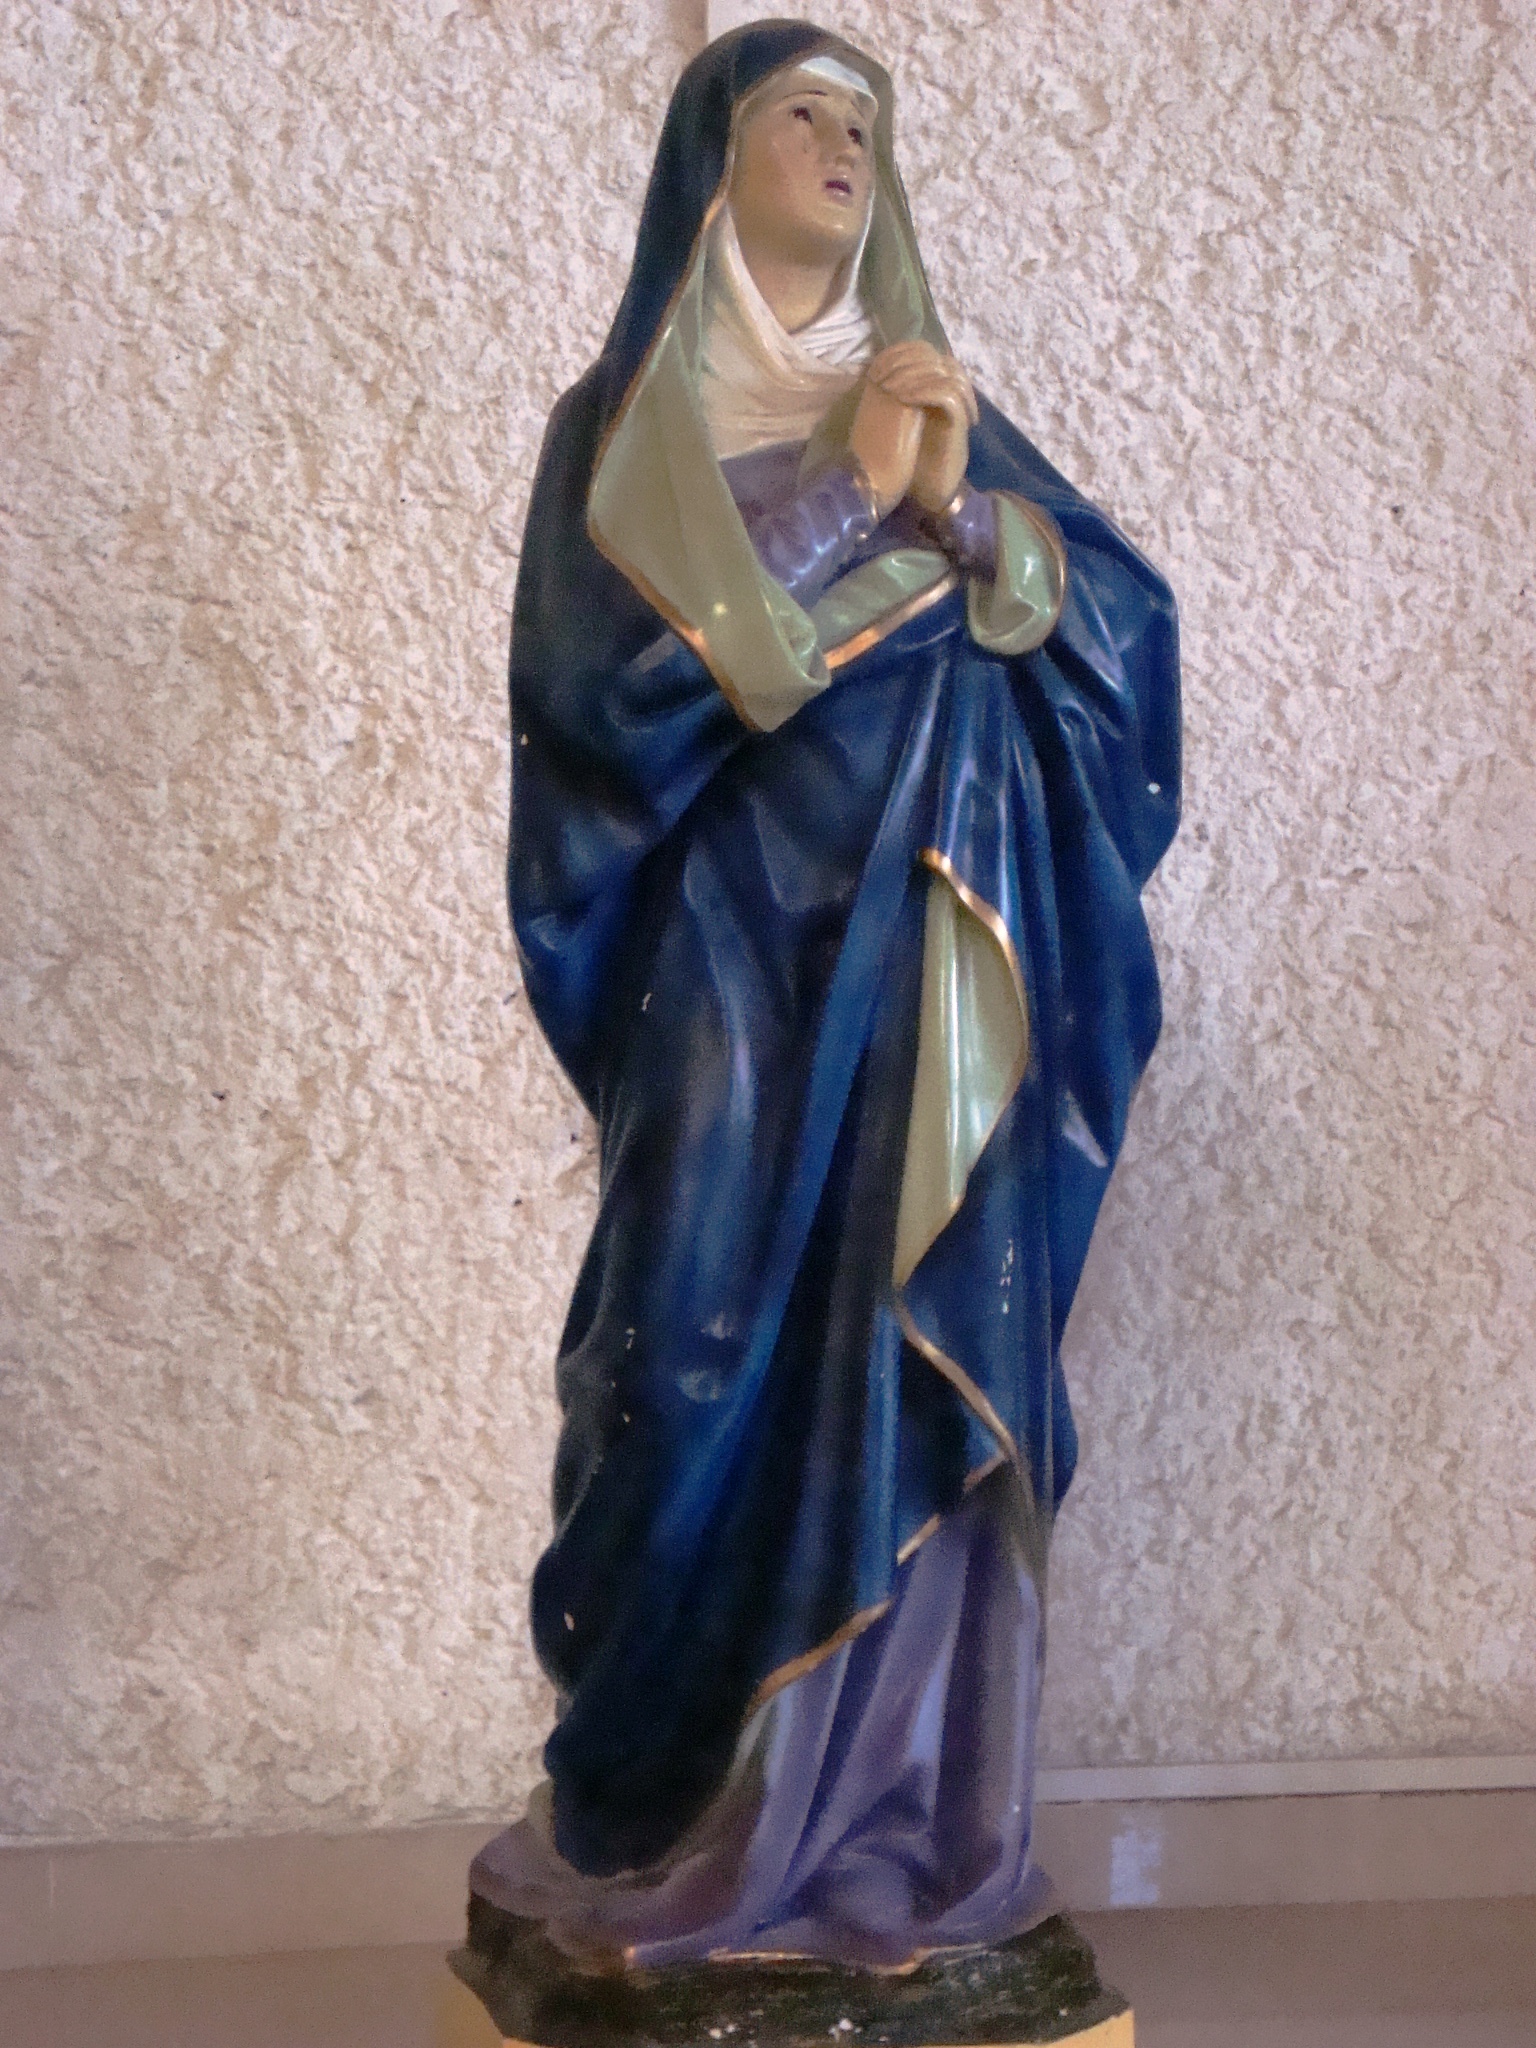 a statue with a blue dress on holding a white cloth